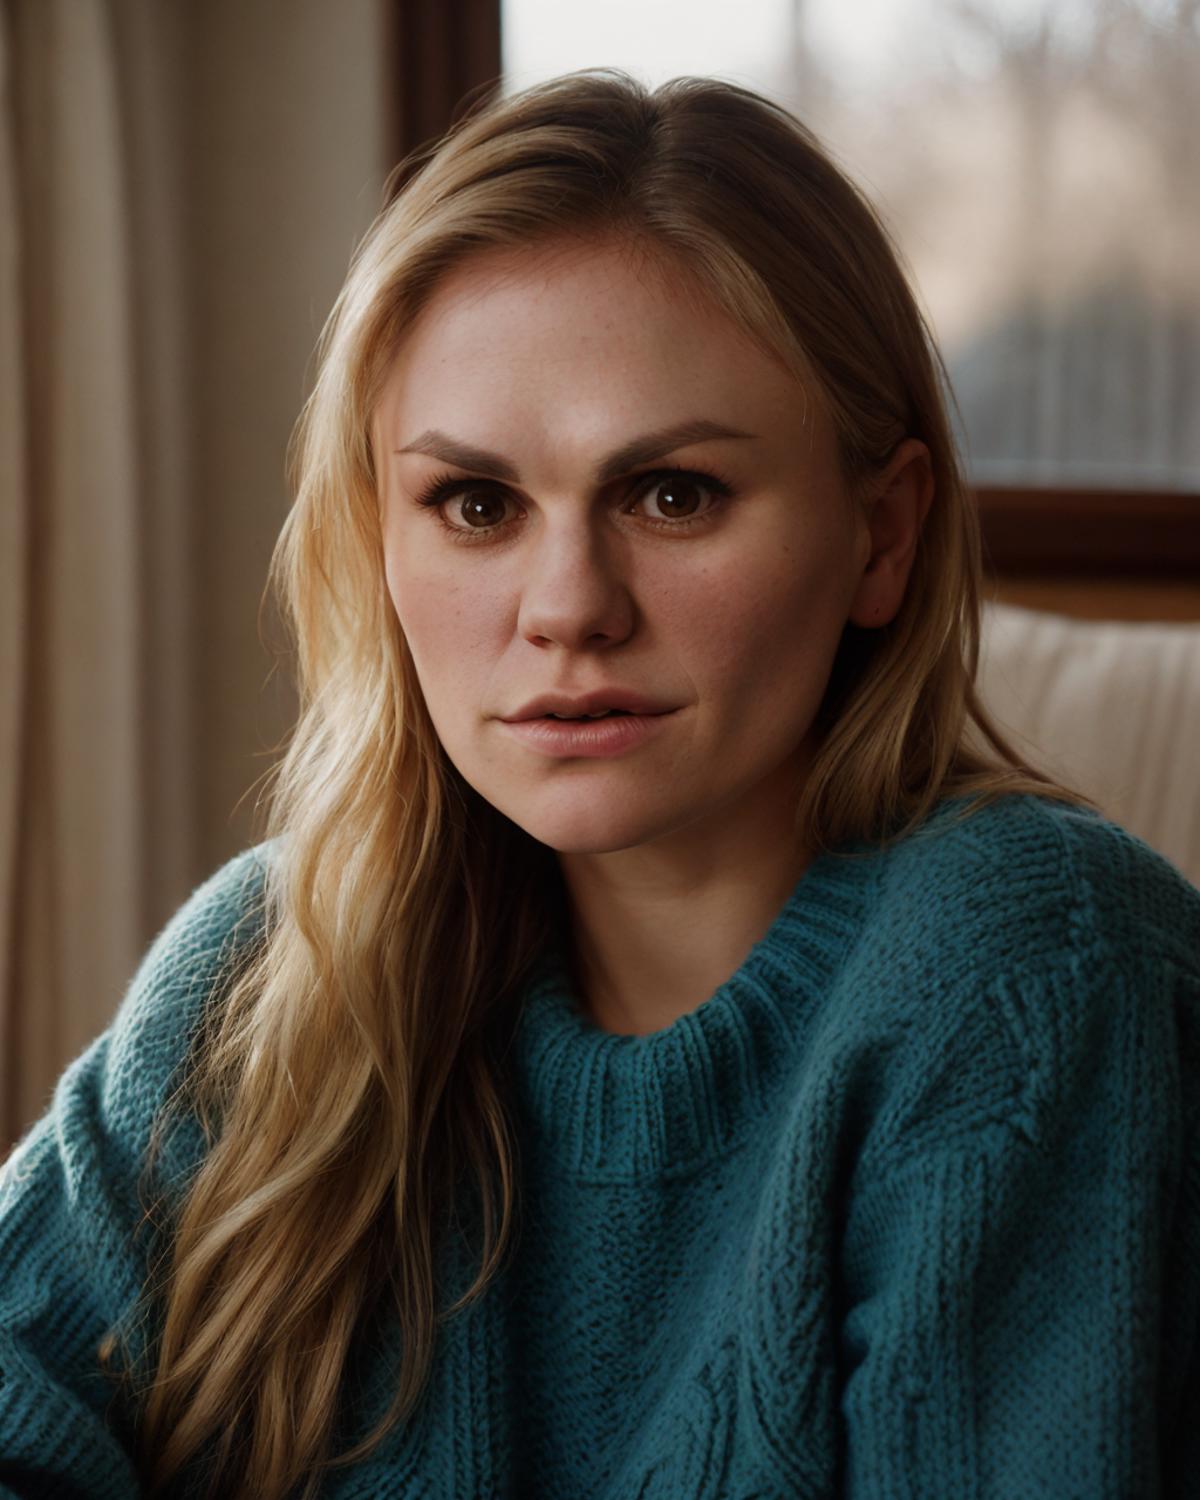 Anna Paquin (Marvel's X-Men's Rogue and Sookie Stackhouse from True Blood TV show) image by halilzeus113